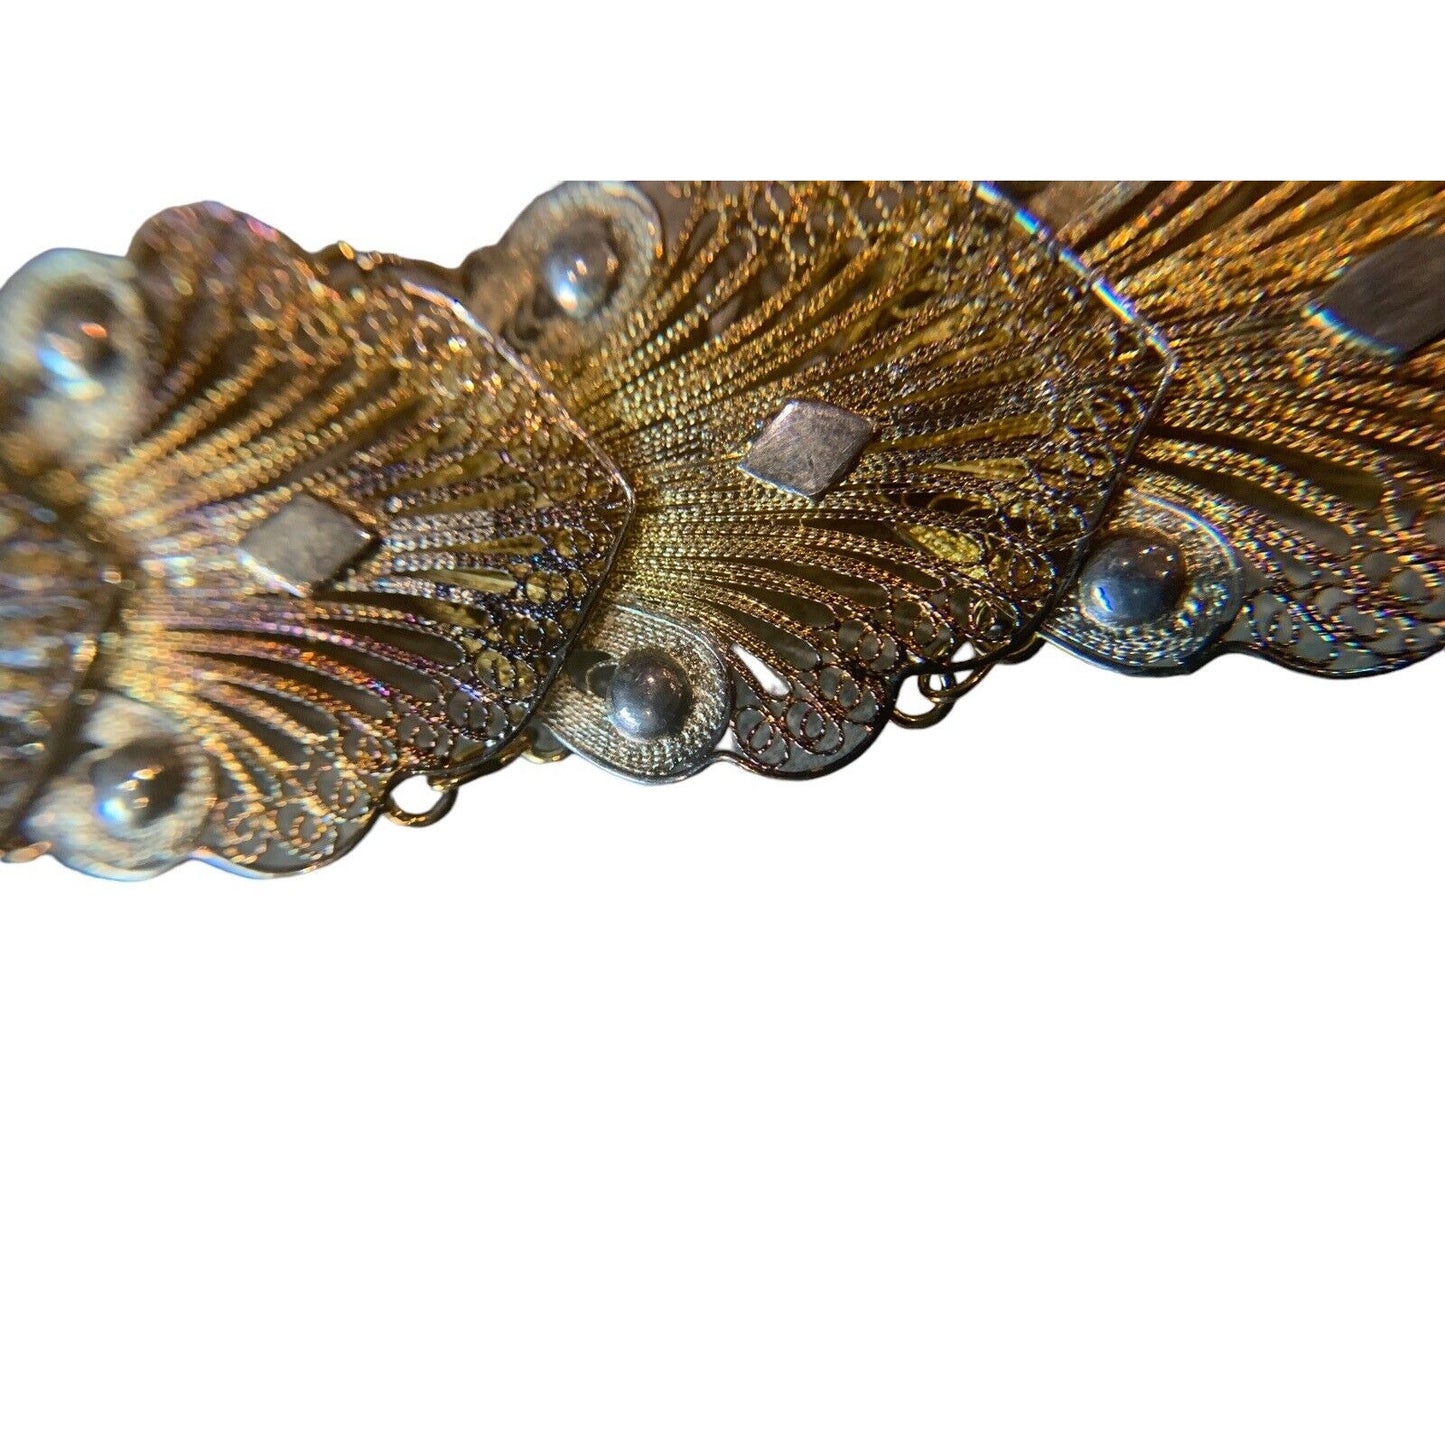 Gold-Plated Tarnished Filigree Bracelet In A Peacock Feather Motif